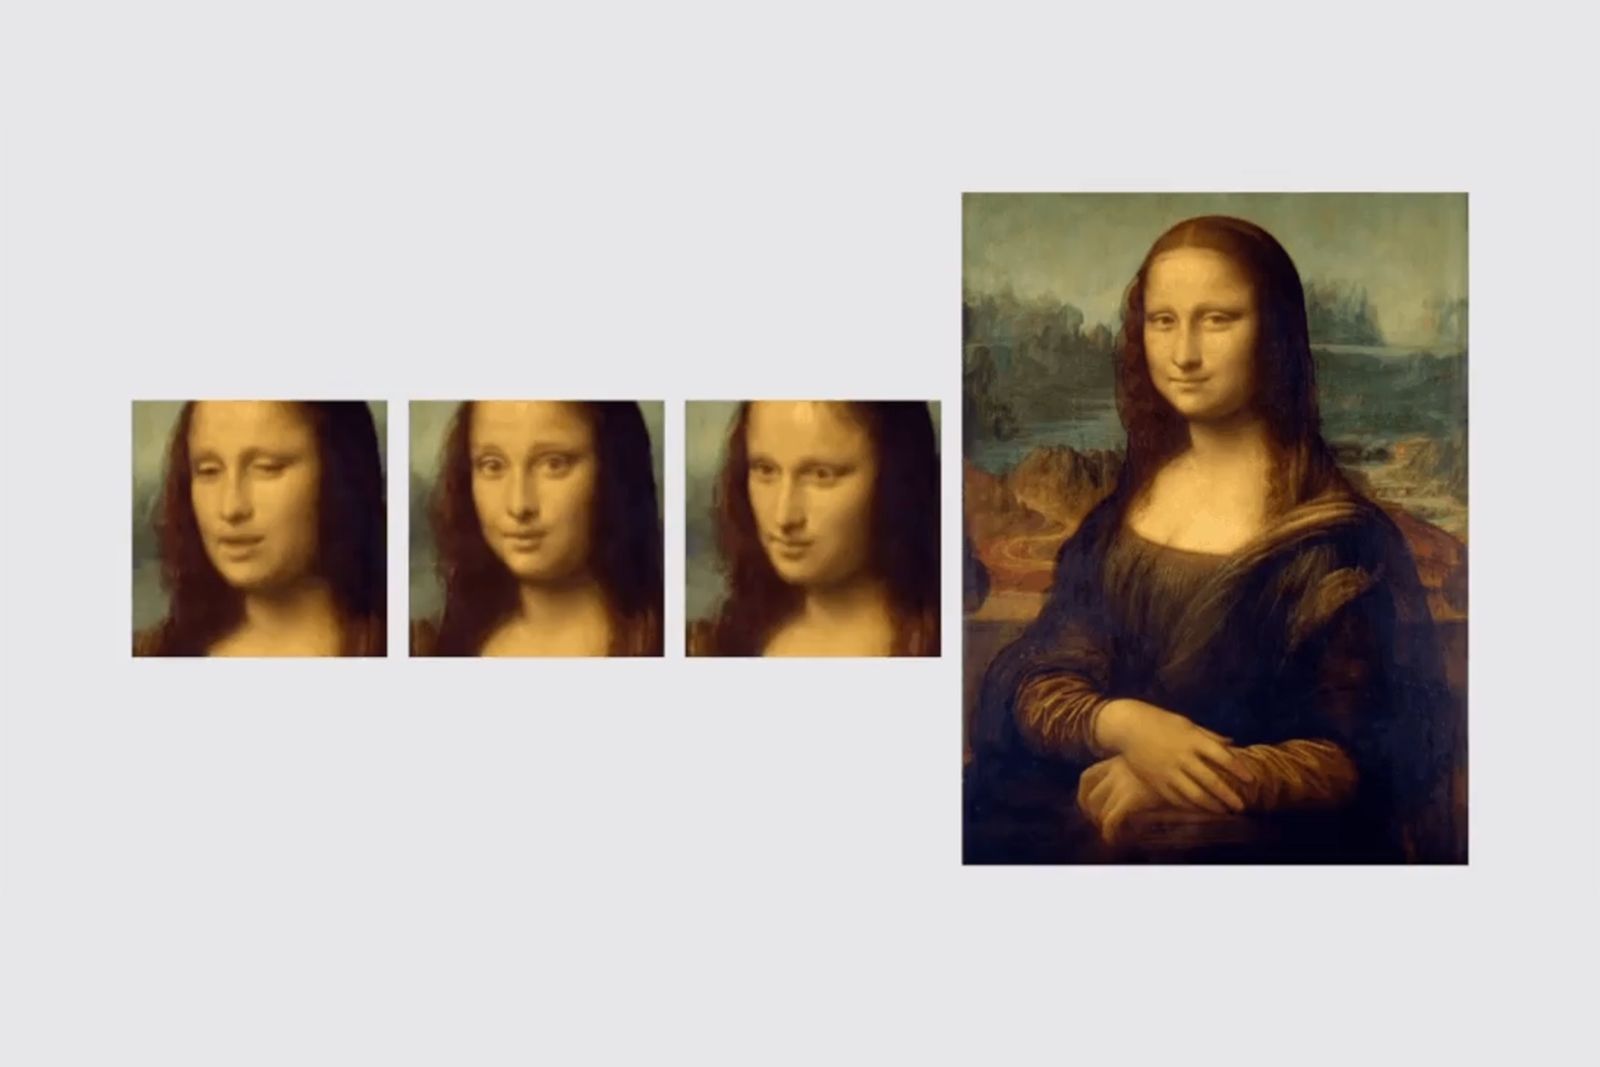 Mona Lisa Brought To Life Samsung Ai Makes Famous Painting Move And Speak image 2